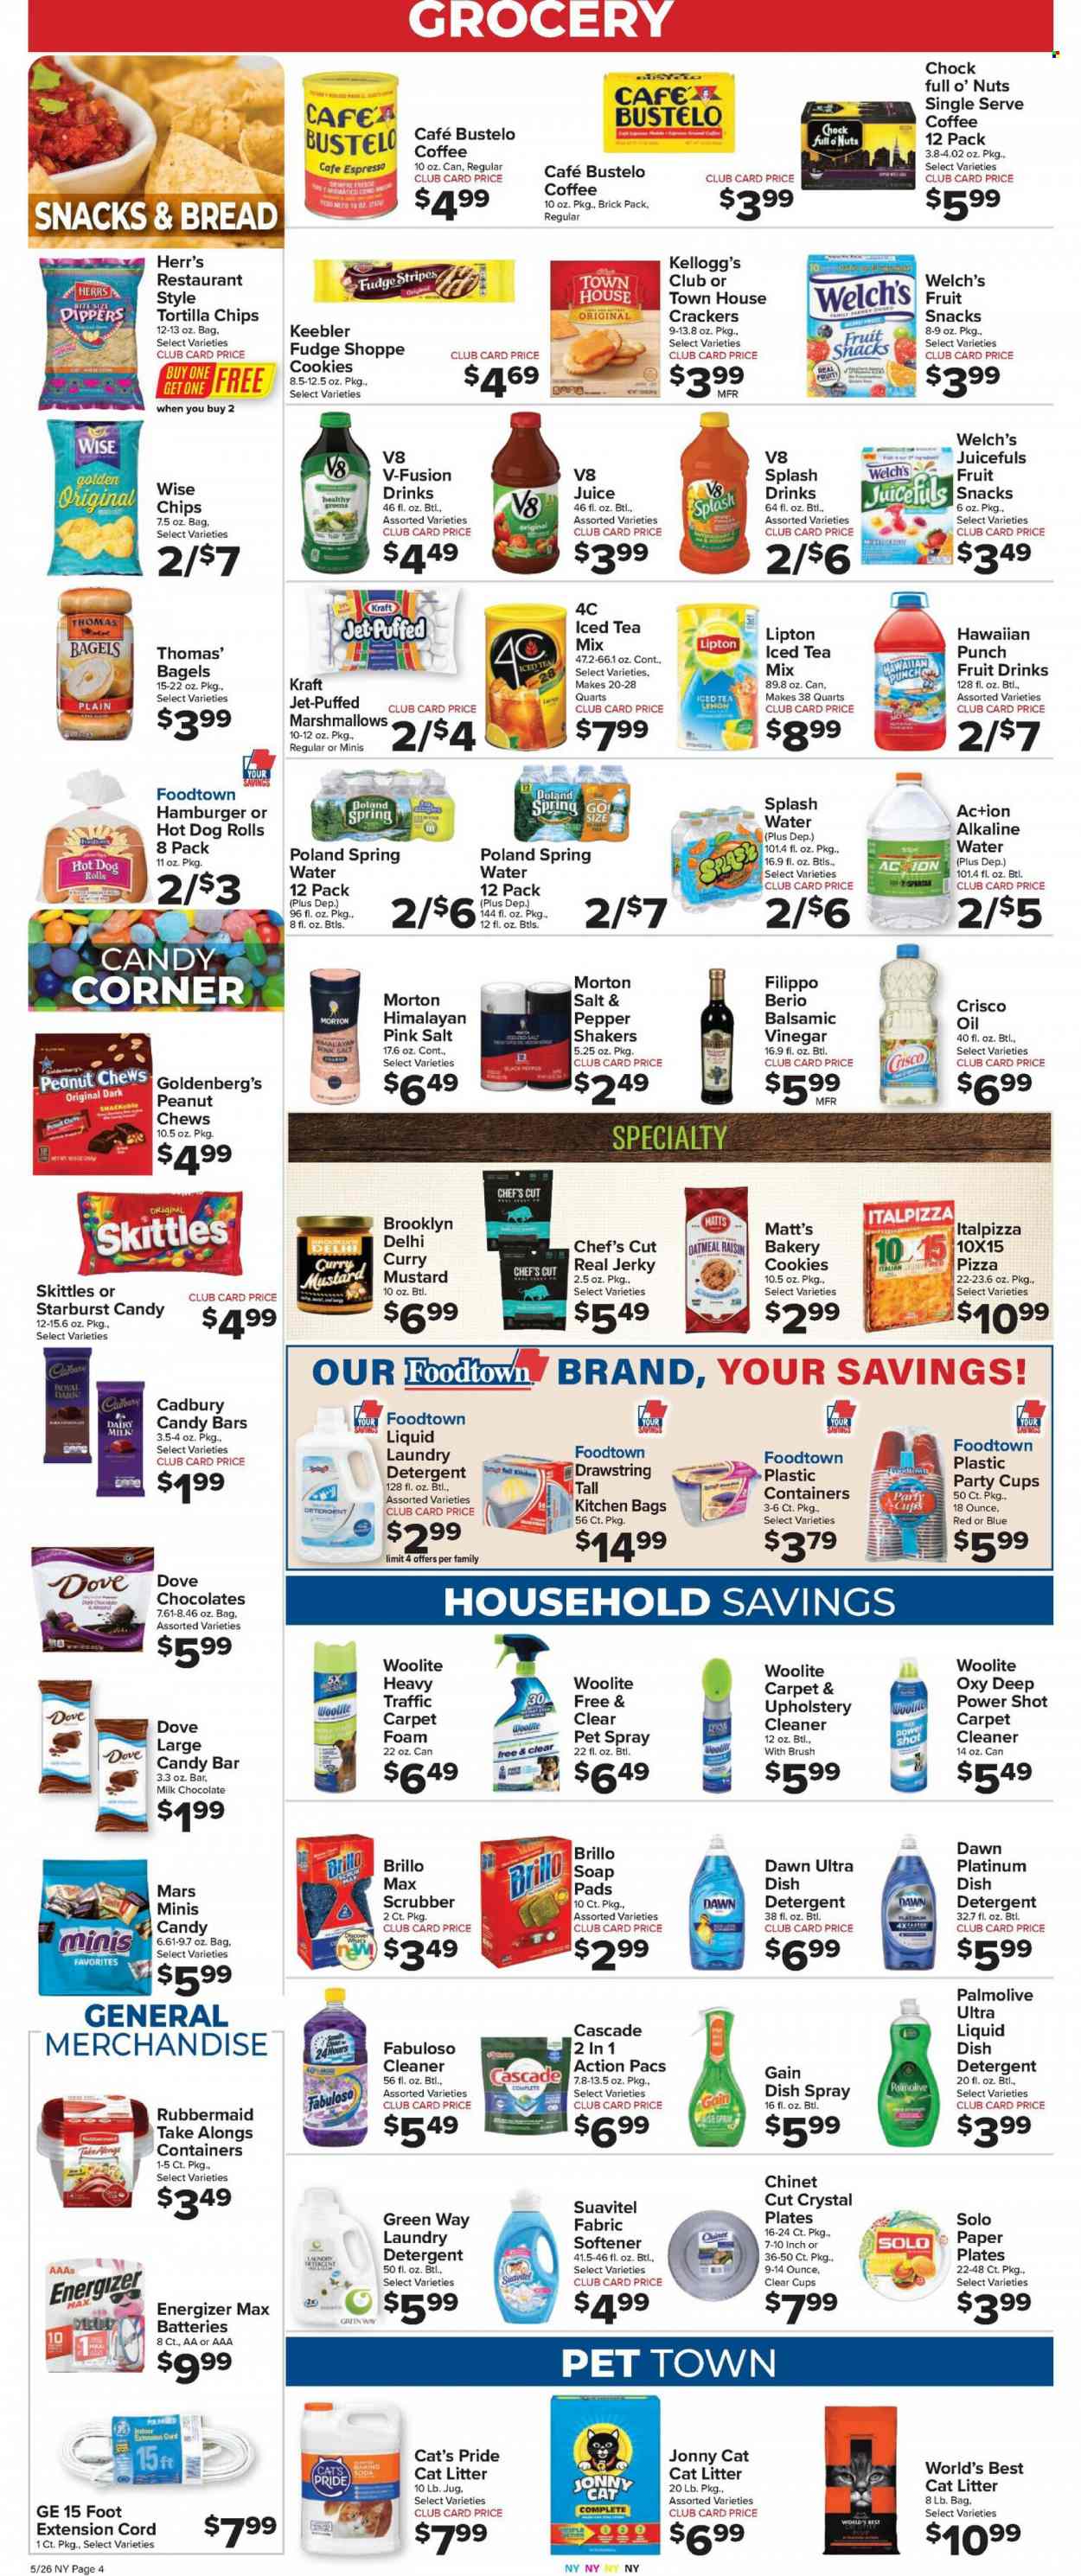 thumbnail - Foodtown Flyer - 05/26/2023 - 06/01/2023 - Sales products - bagels, bread, hot dog rolls, corn, Welch's, tuna, pizza, hamburger, Kraft®, jerky, cookies, Dove, fudge, marshmallows, milk chocolate, chocolate, Mars, crackers, chewing gum, Kellogg's, dark chocolate, Cadbury, Skittles, fruit snack, Keebler, Starburst, candy bar, tortilla chips, chips, Crisco, oatmeal, black pepper, mustard, balsamic vinegar, juice, Lipton, ice tea, spring water, soda, alkaline water, water, coffee, ground coffee, beer, detergent, Gain, cleaner, Woolite, Fabuloso, carpet cleaner, Cascade, fabric softener, laundry detergent, Suavitel, dishwasher cleaner, Jet, Palmolive, soap, plate, paper plate, party cups, battery, Energizer, cat litter. Page 6.